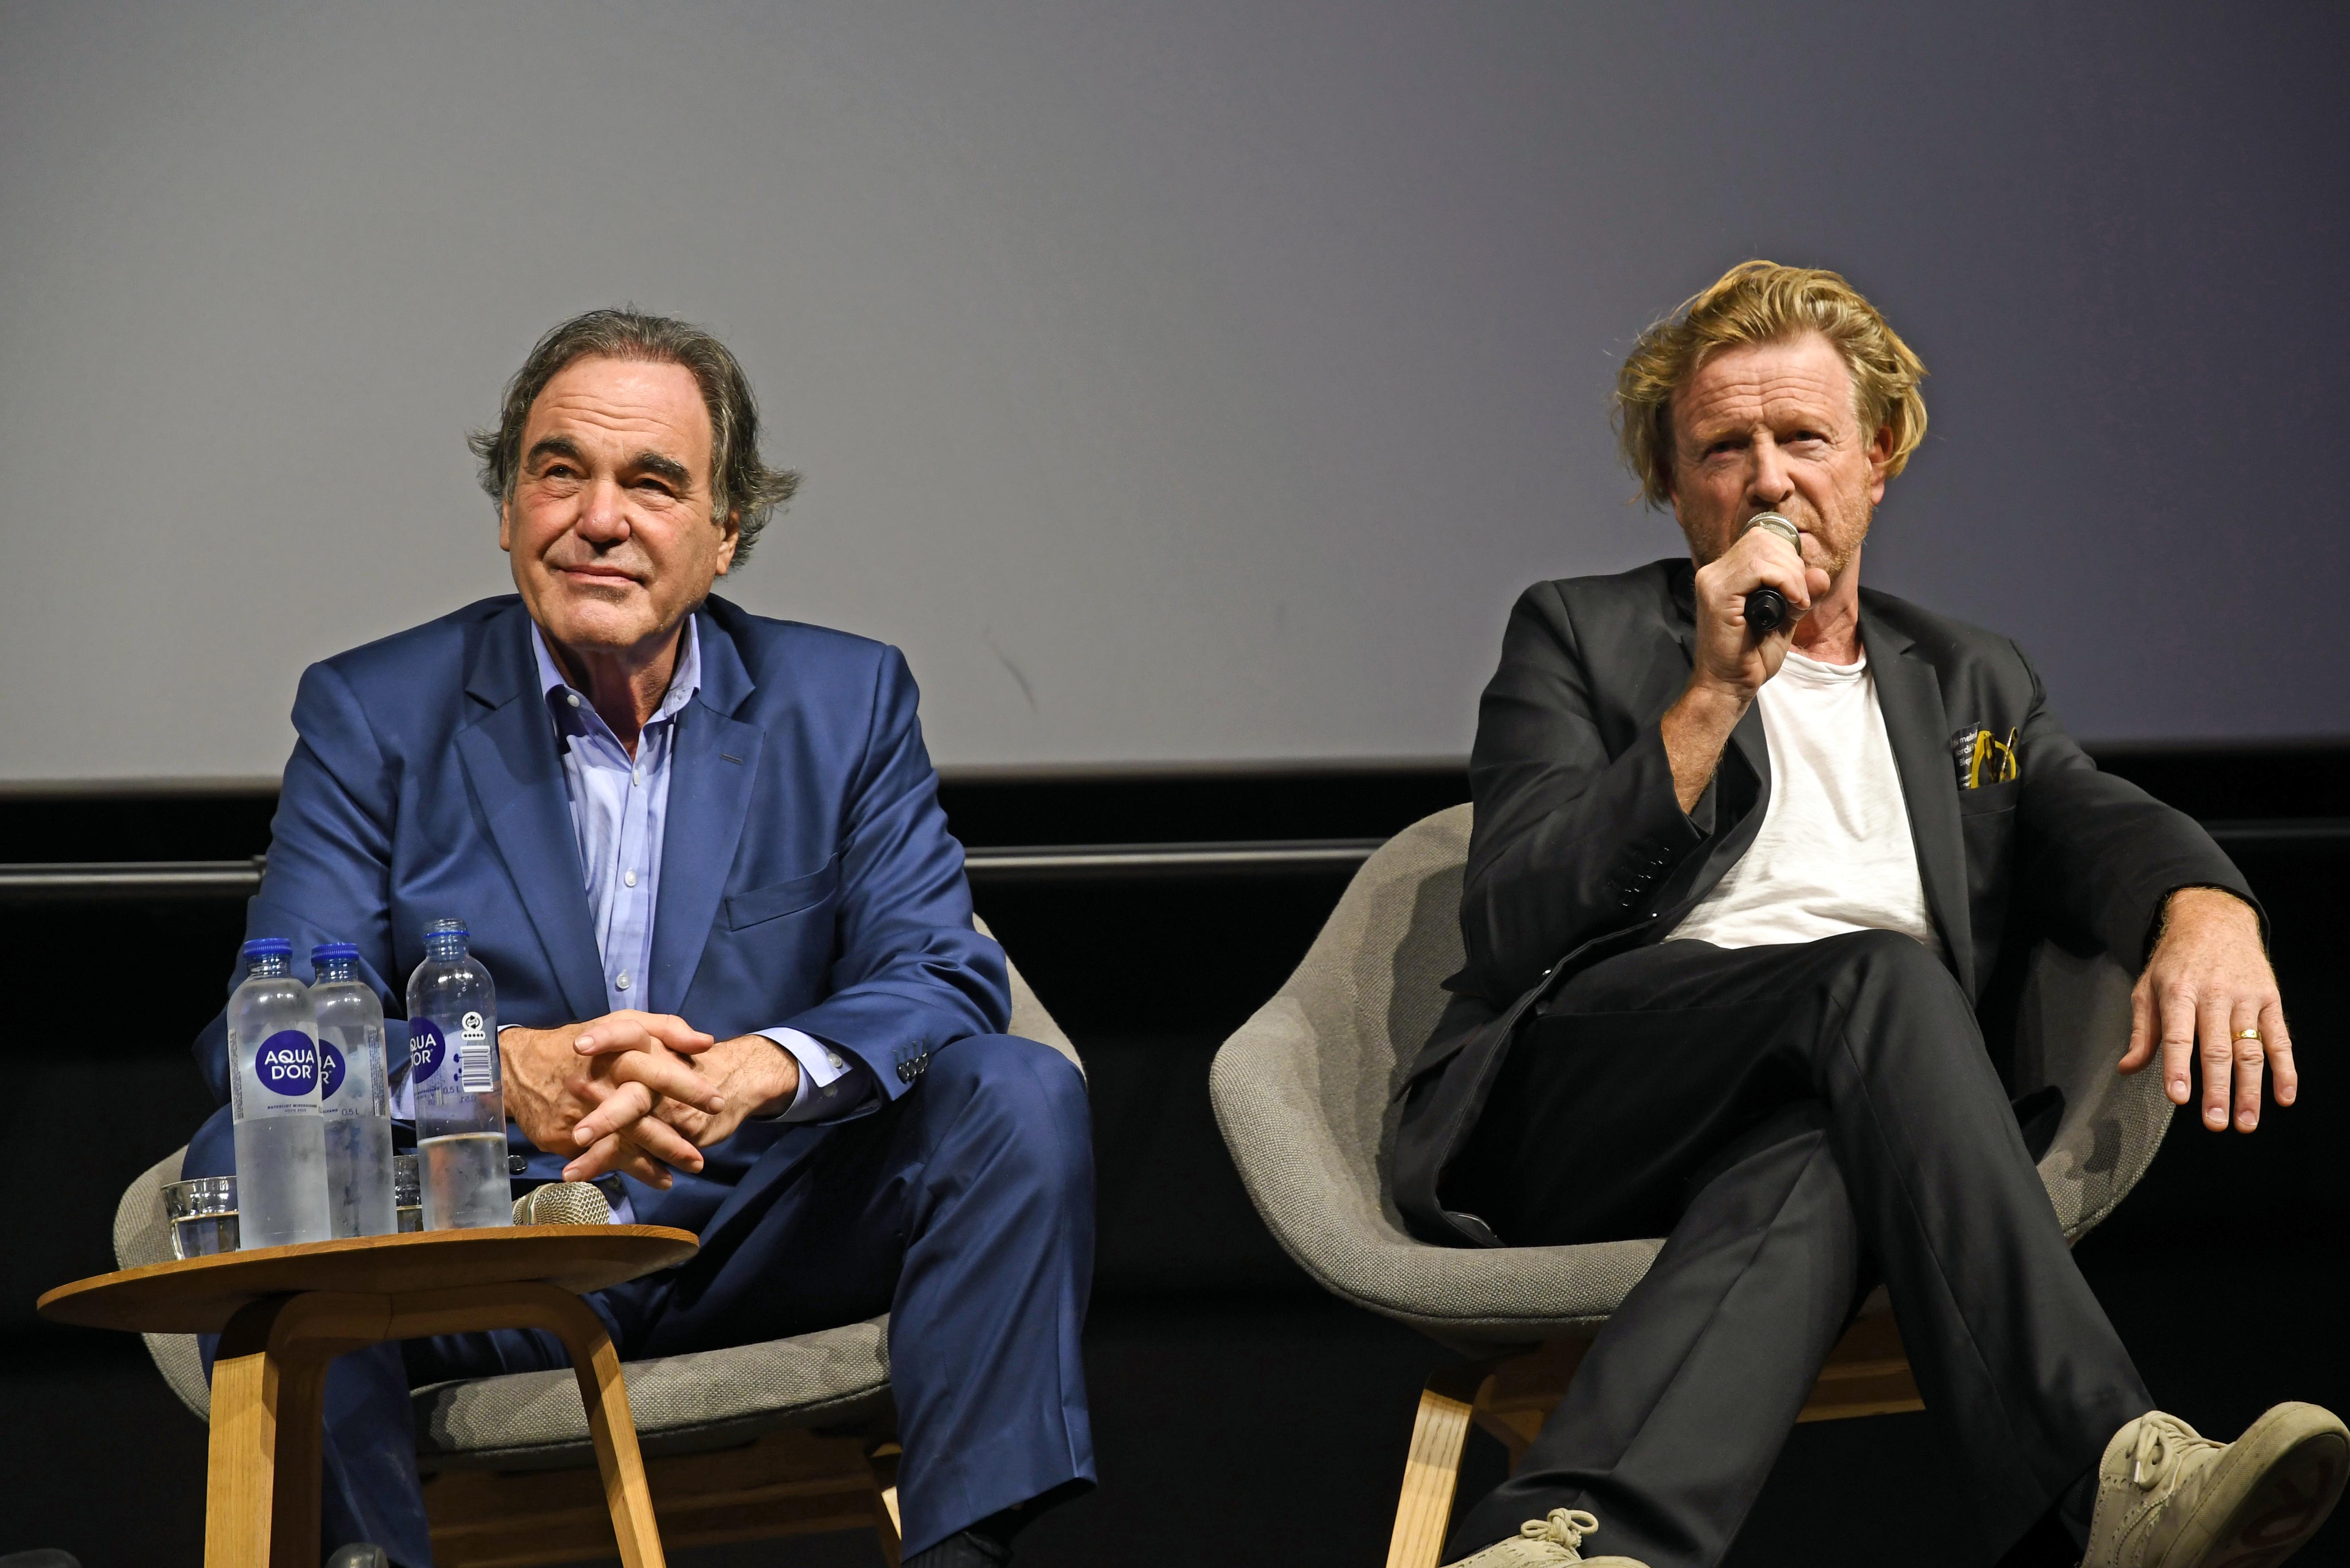 Oliver Stone in Denmark promoting ‘Snowden’ with his Copenhagen-based cinematographer